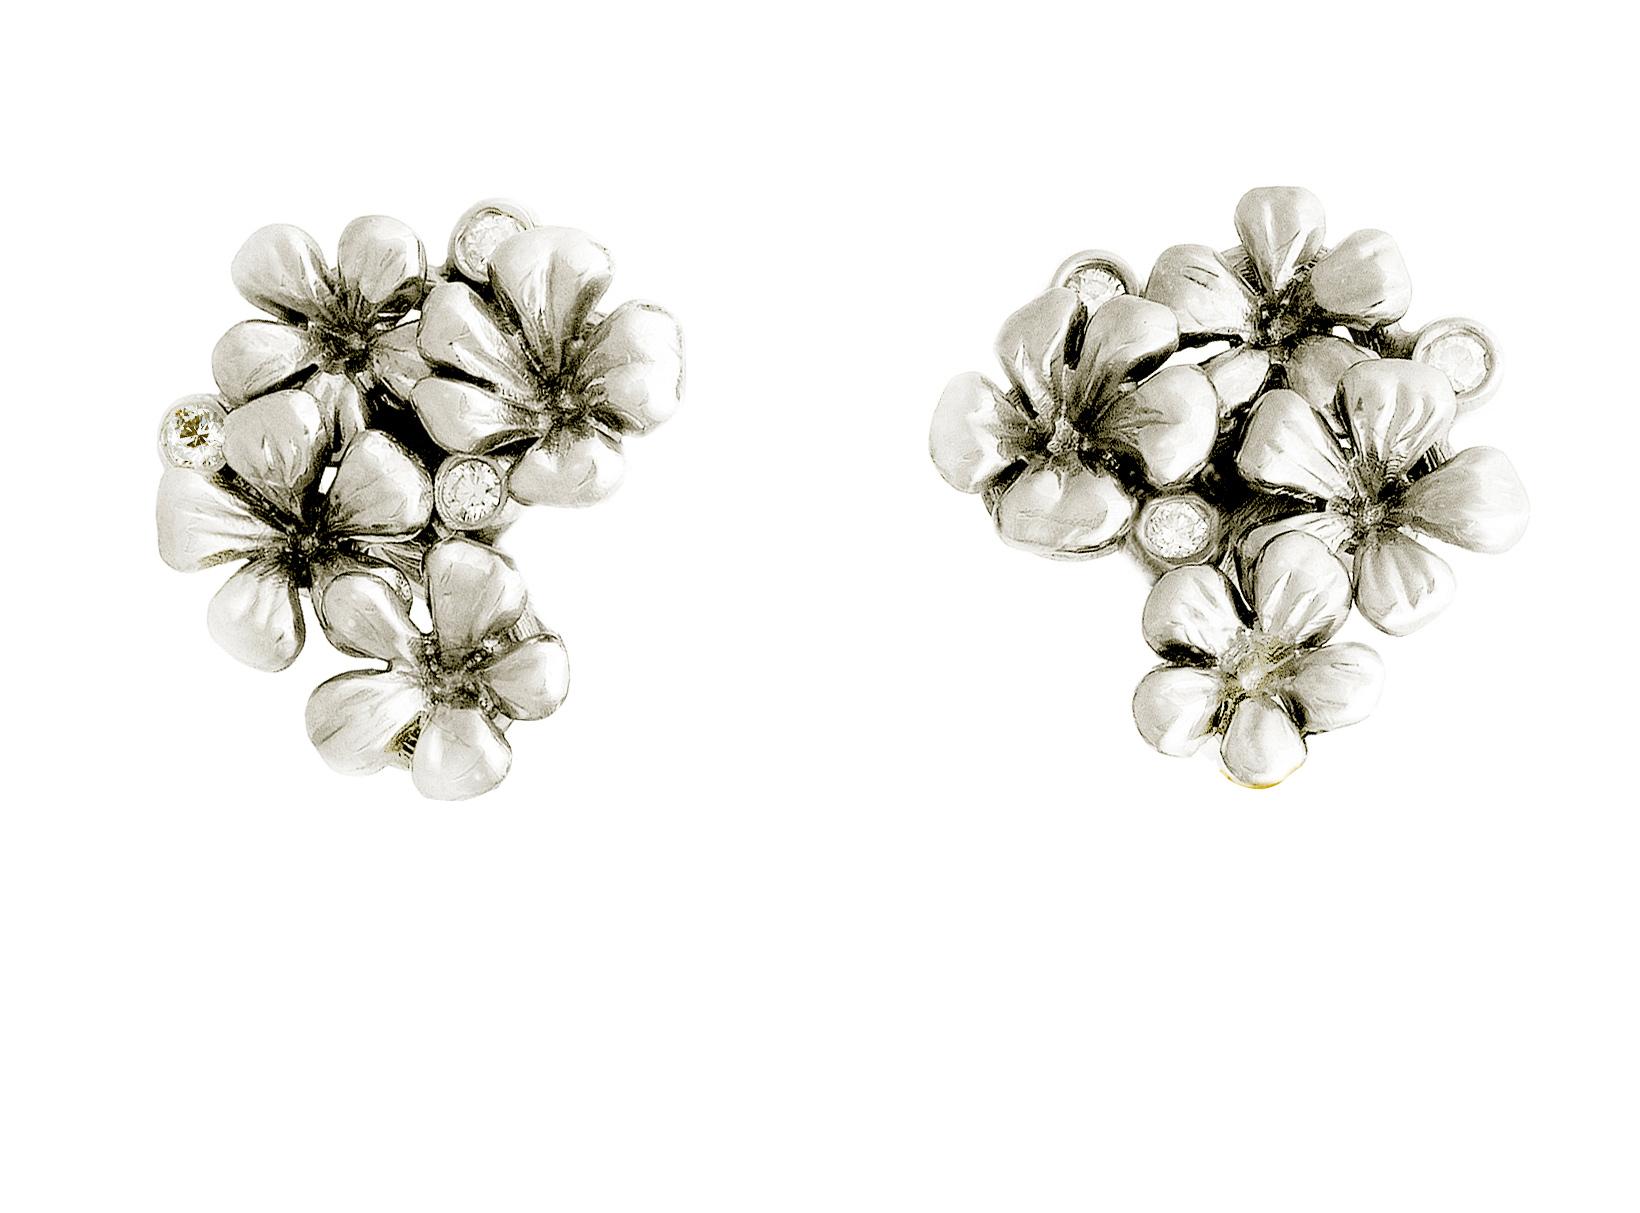 These 14 karat white gold Plum Blossom stud earrings are encrusted with 6 round diamonds (or pink sapphires, or tourmalines) and and neon paraiba tourmalines in pear cut, 8x5 mm each. This jewellery collection was featured in Vogue UA and Harper's